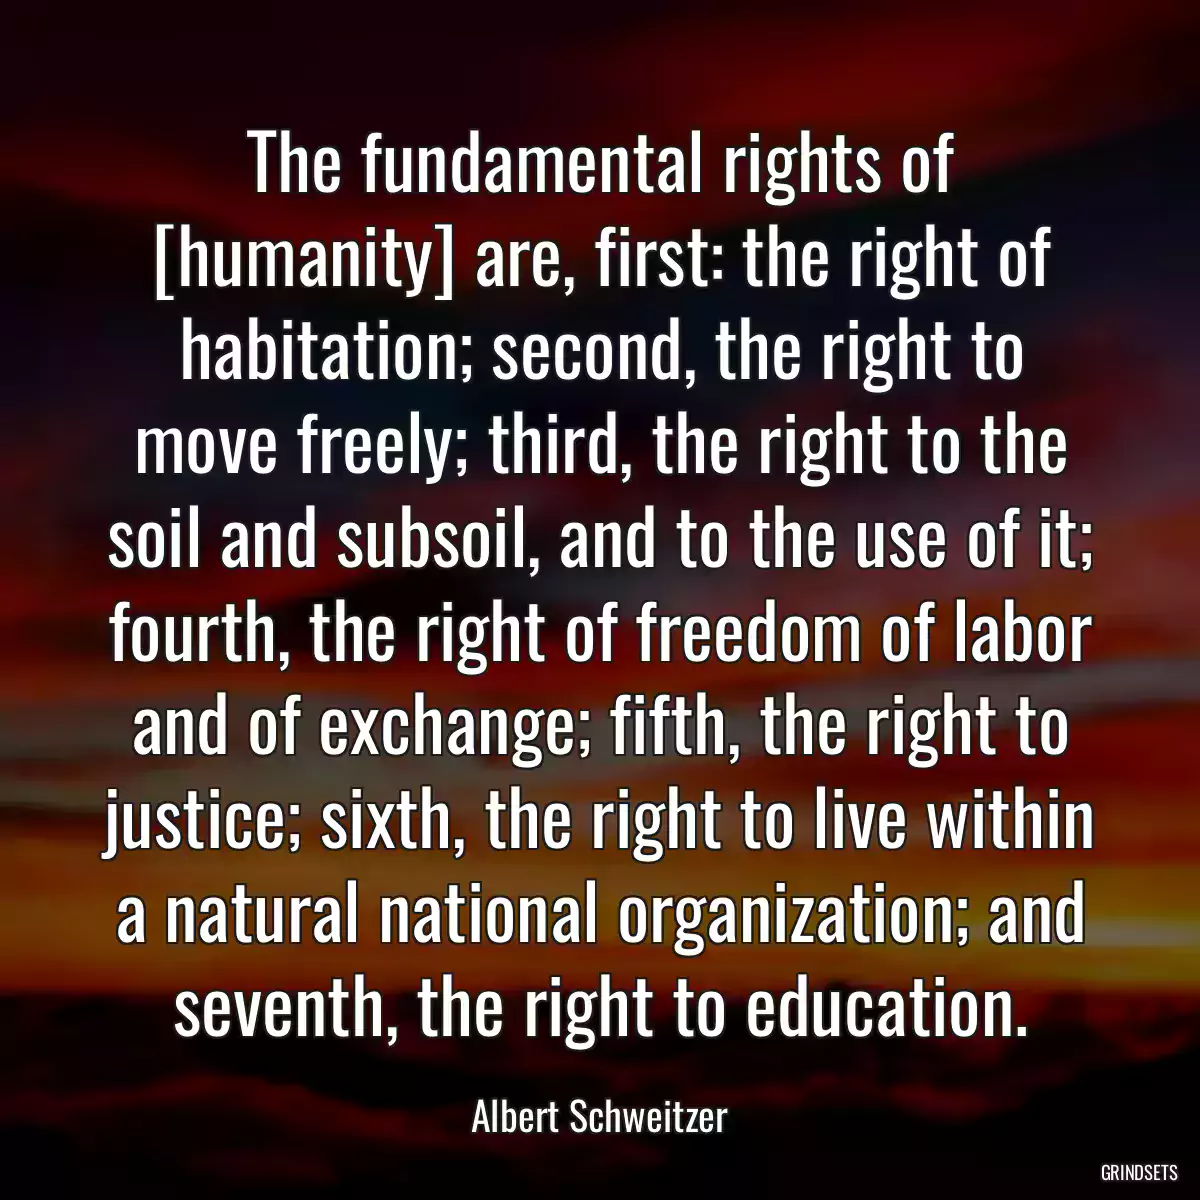 The fundamental rights of [humanity] are, first: the right of habitation; second, the right to move freely; third, the right to the soil and subsoil, and to the use of it; fourth, the right of freedom of labor and of exchange; fifth, the right to justice; sixth, the right to live within a natural national organization; and seventh, the right to education.